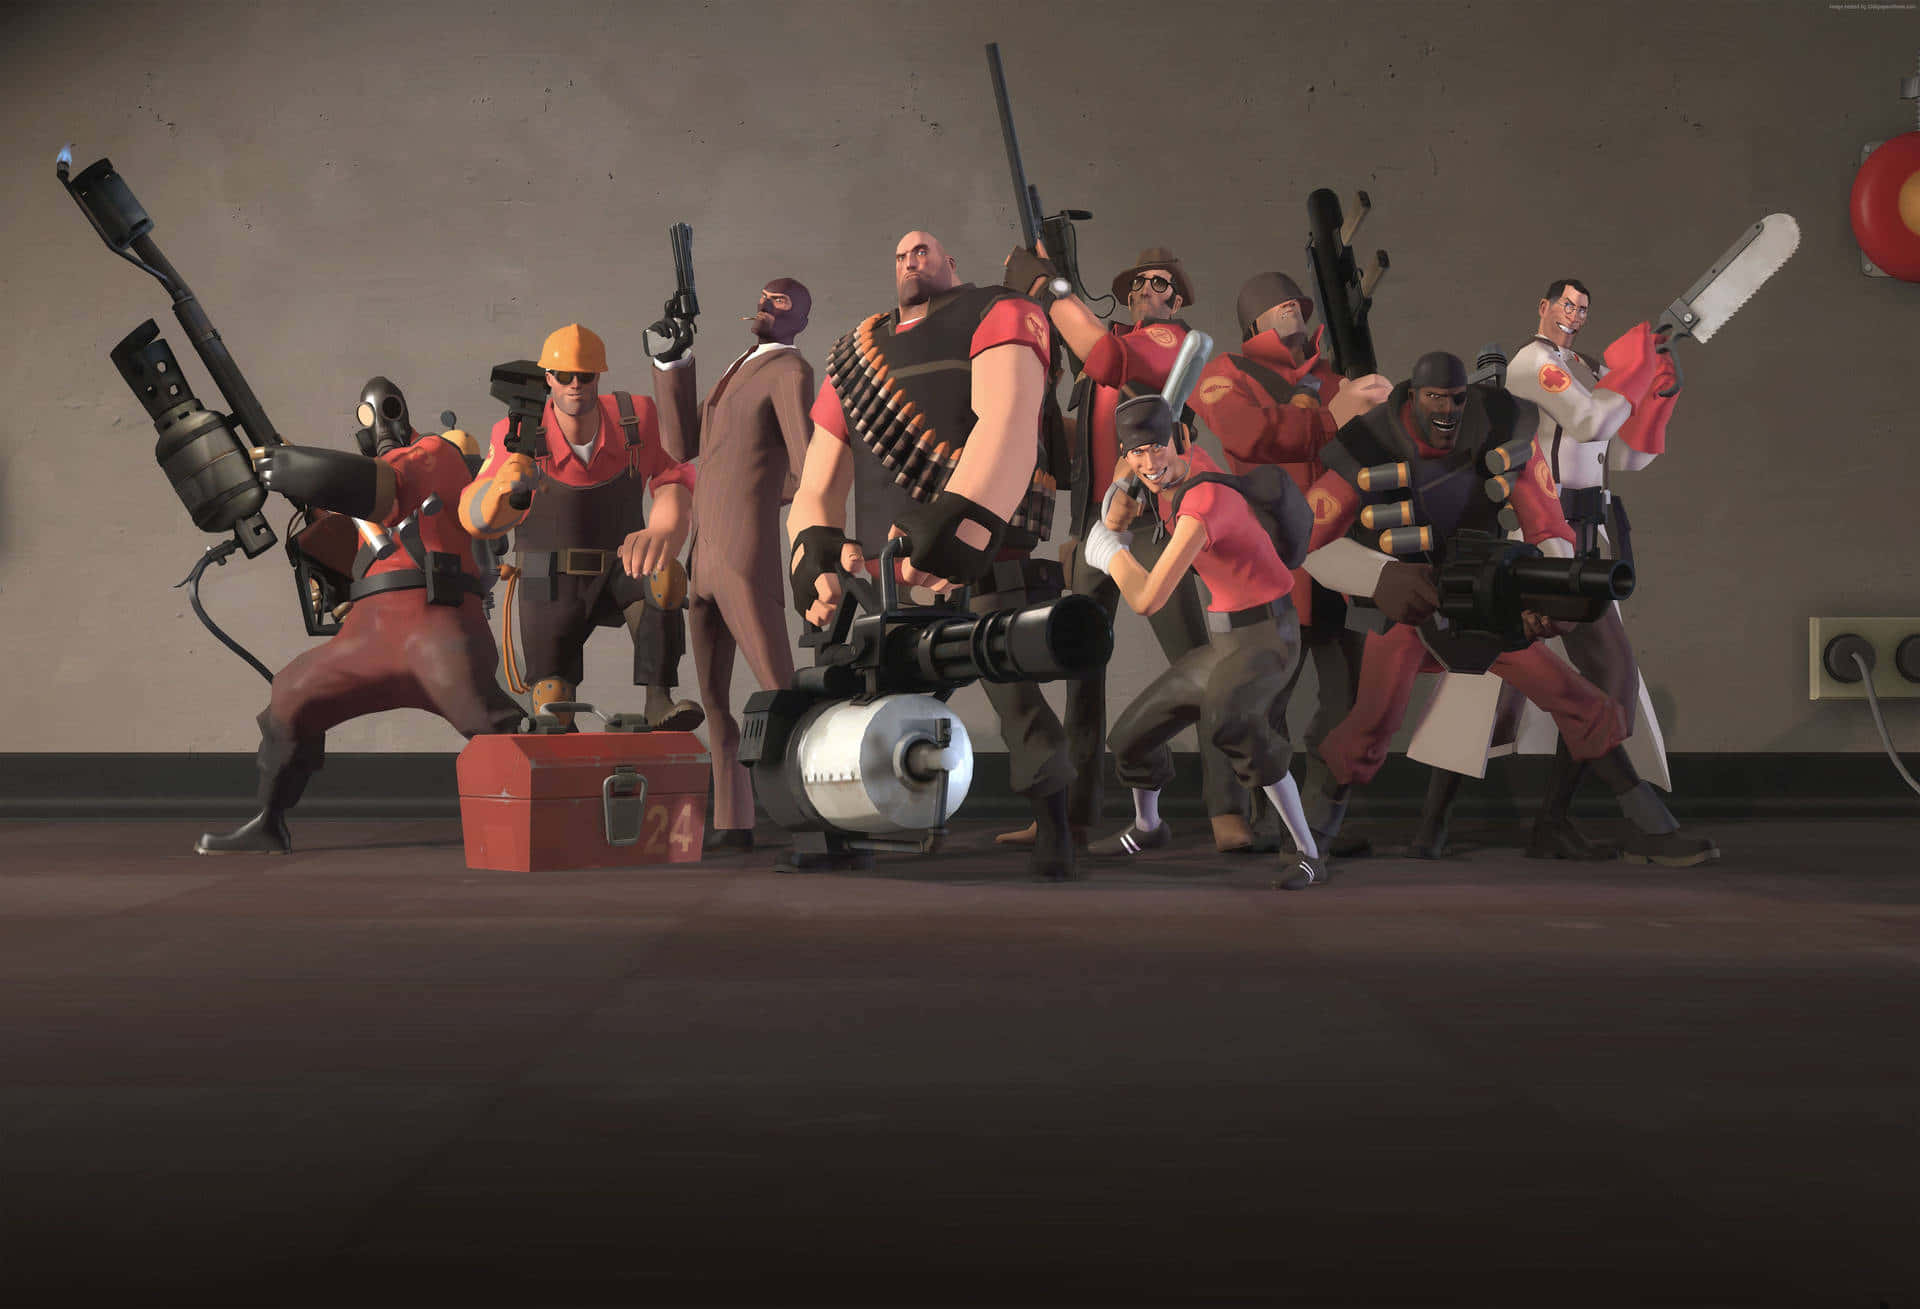 Team Fortress 2 characters, ready for battle.